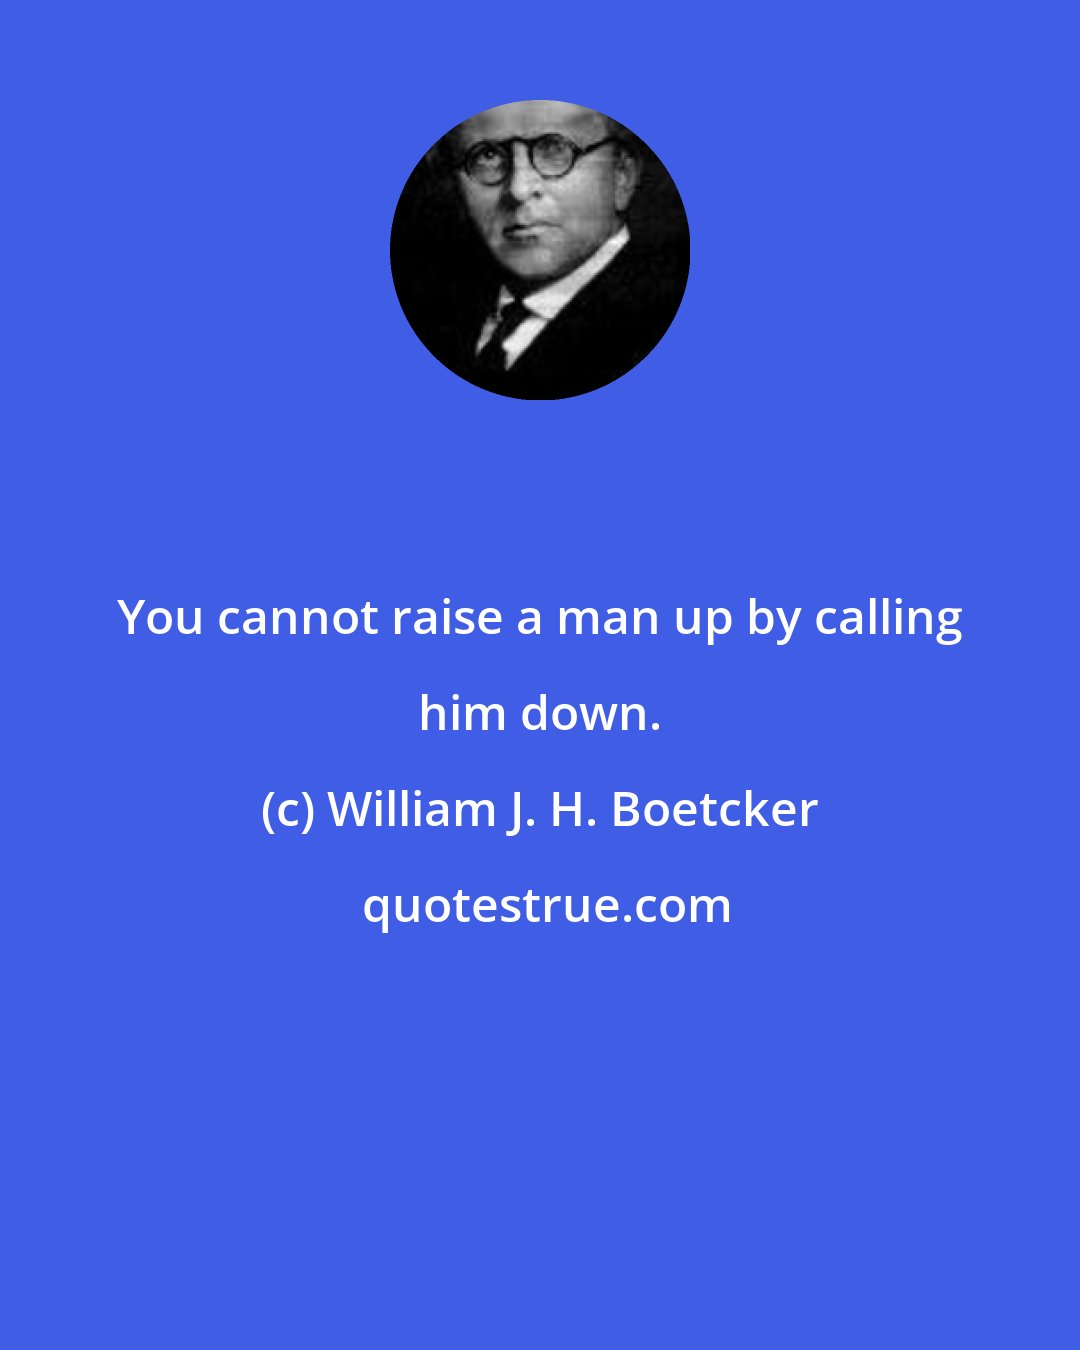 William J. H. Boetcker: You cannot raise a man up by calling him down.